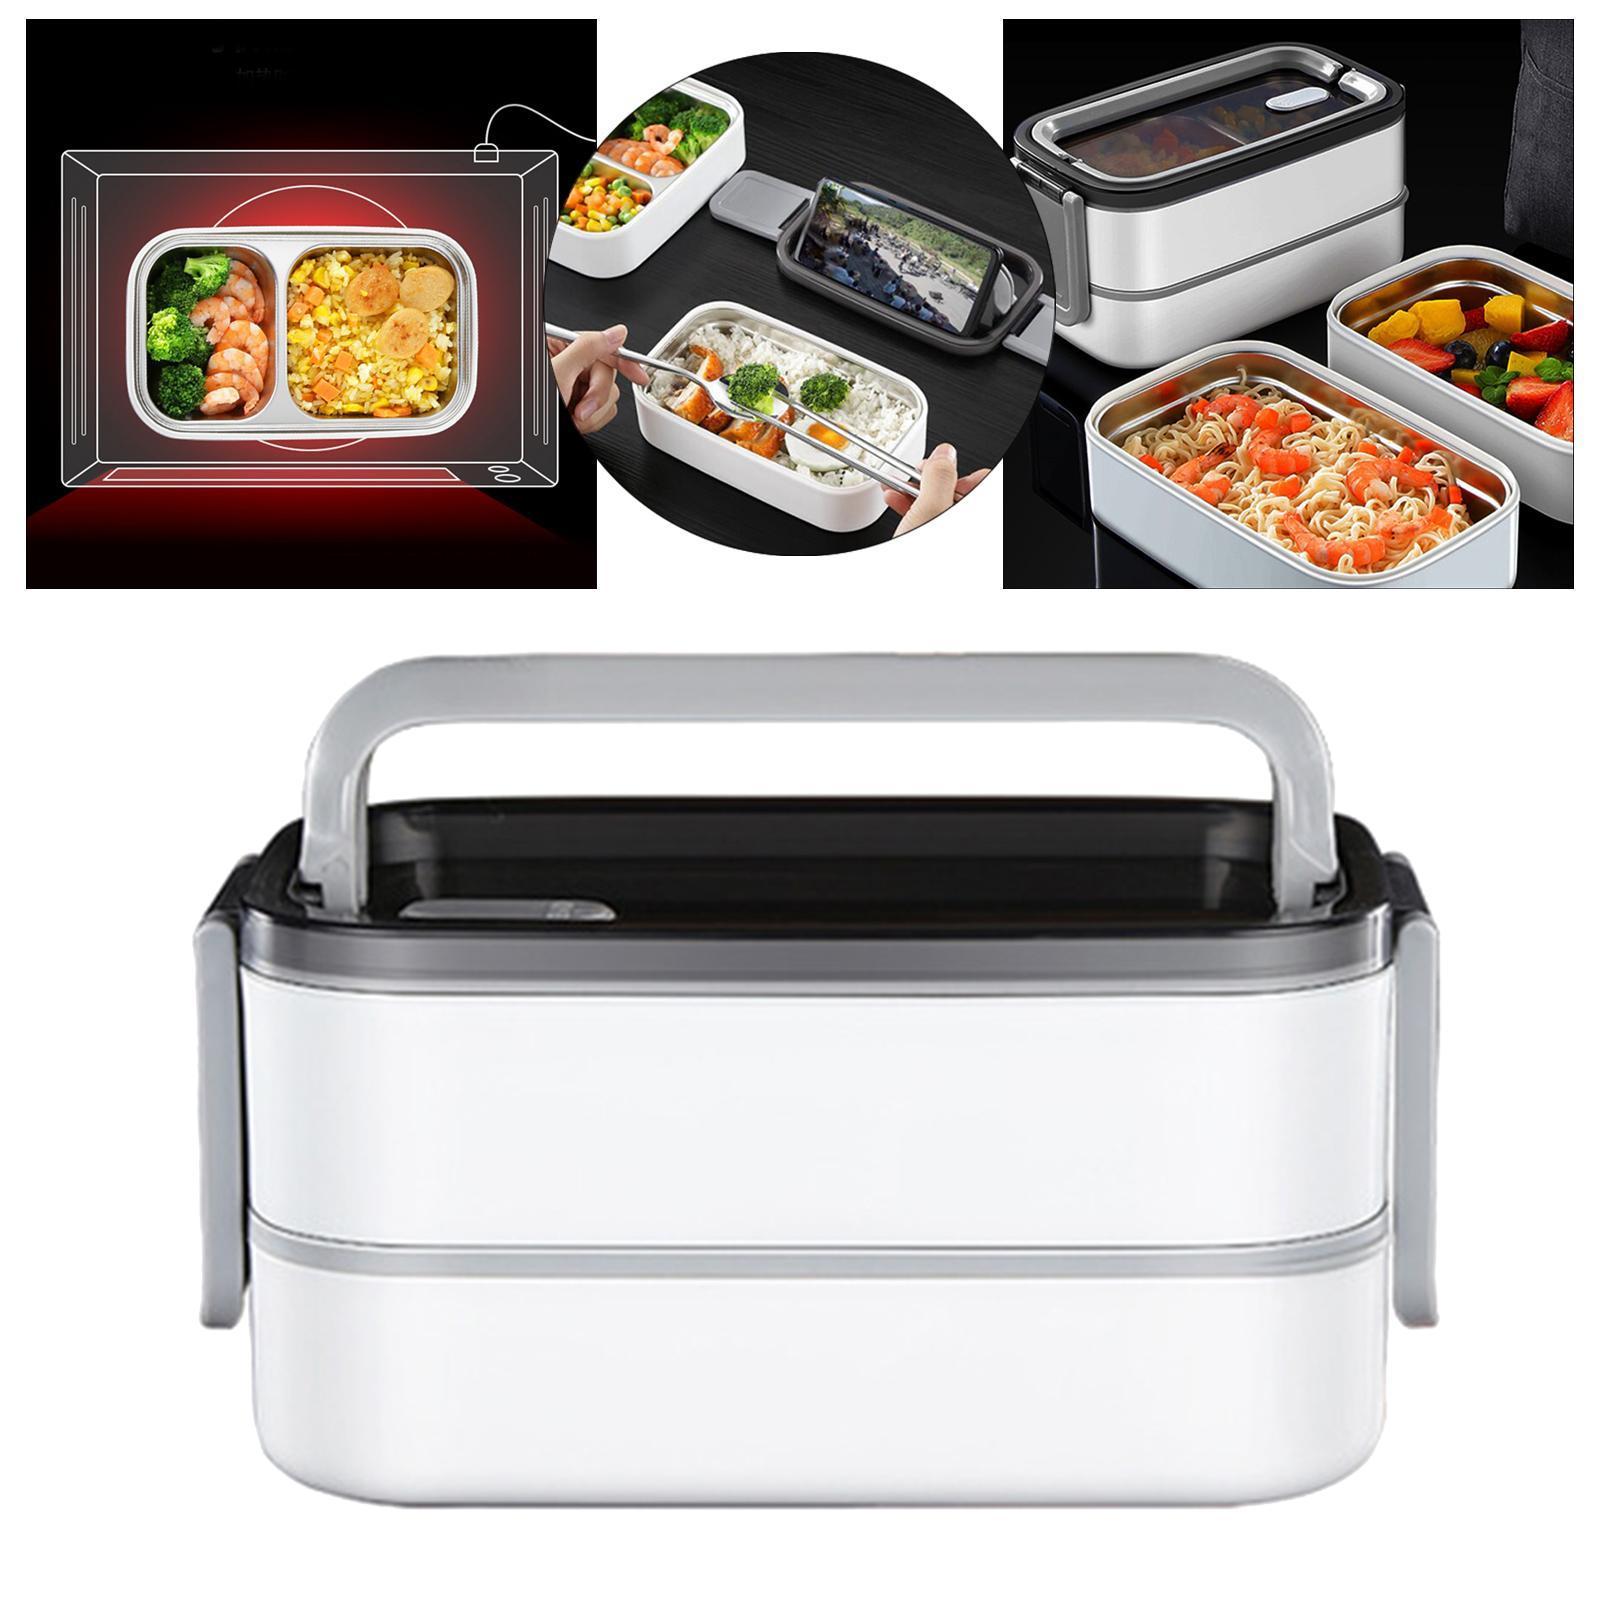 Stainless Steel Bento Box Food Warmer Container for Camping Adults Kids